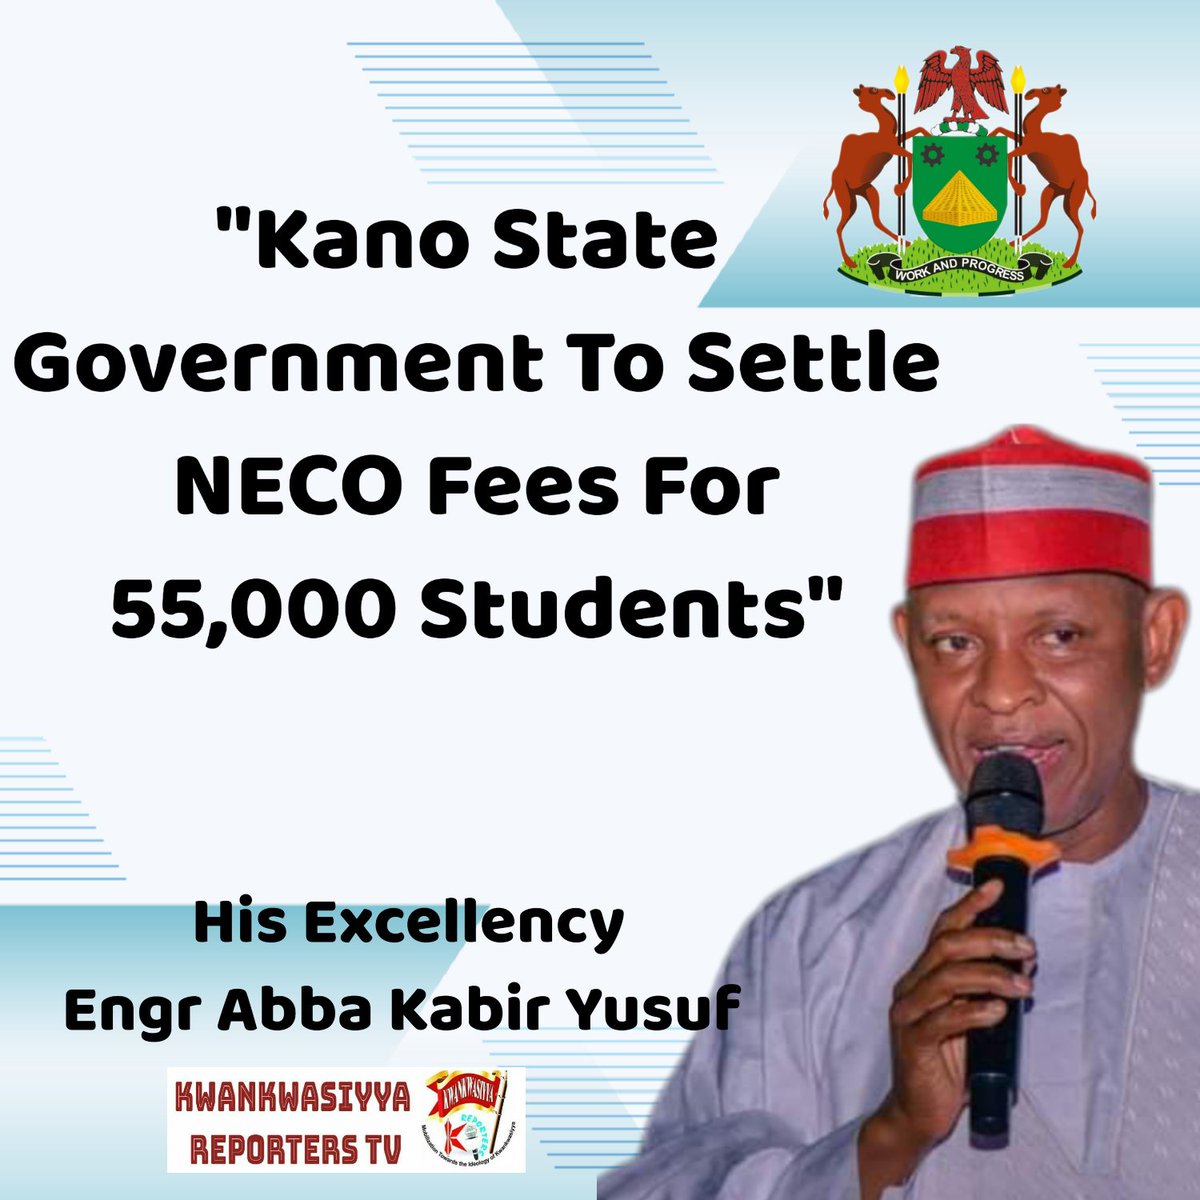 Kano State Government To Settle NECO Fees For 55,000 Students